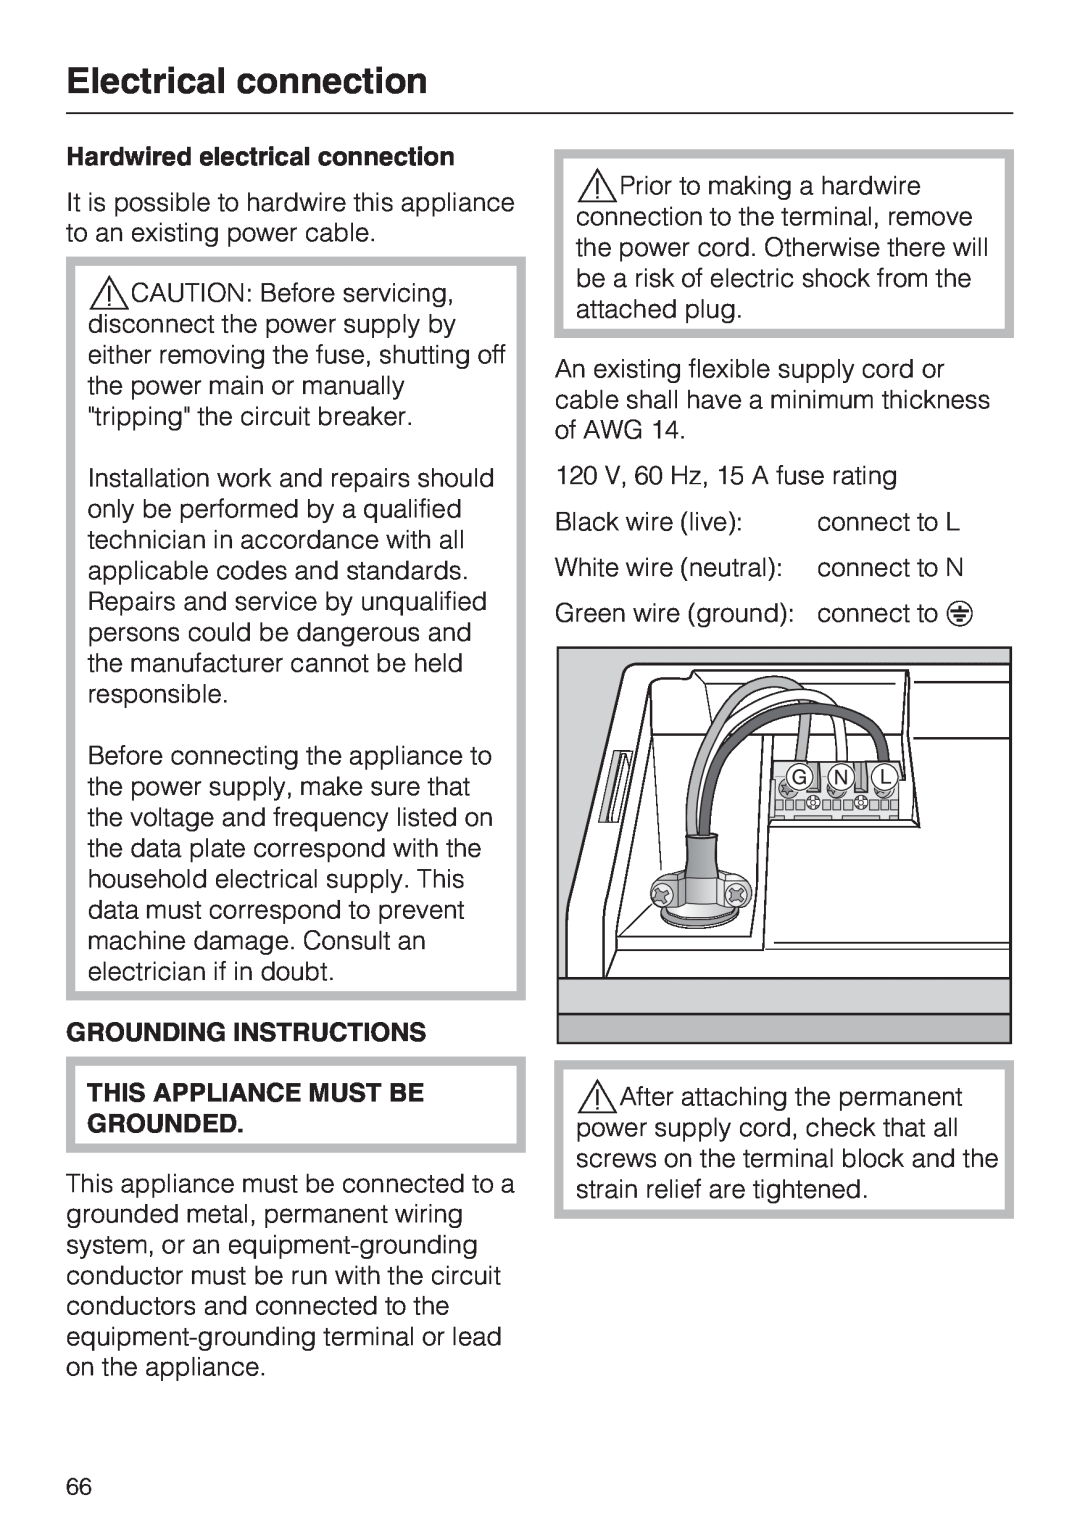 Miele G 5705, G 5700 operating instructions Electrical connection, Hardwired electrical connection, Grounding Instructions 